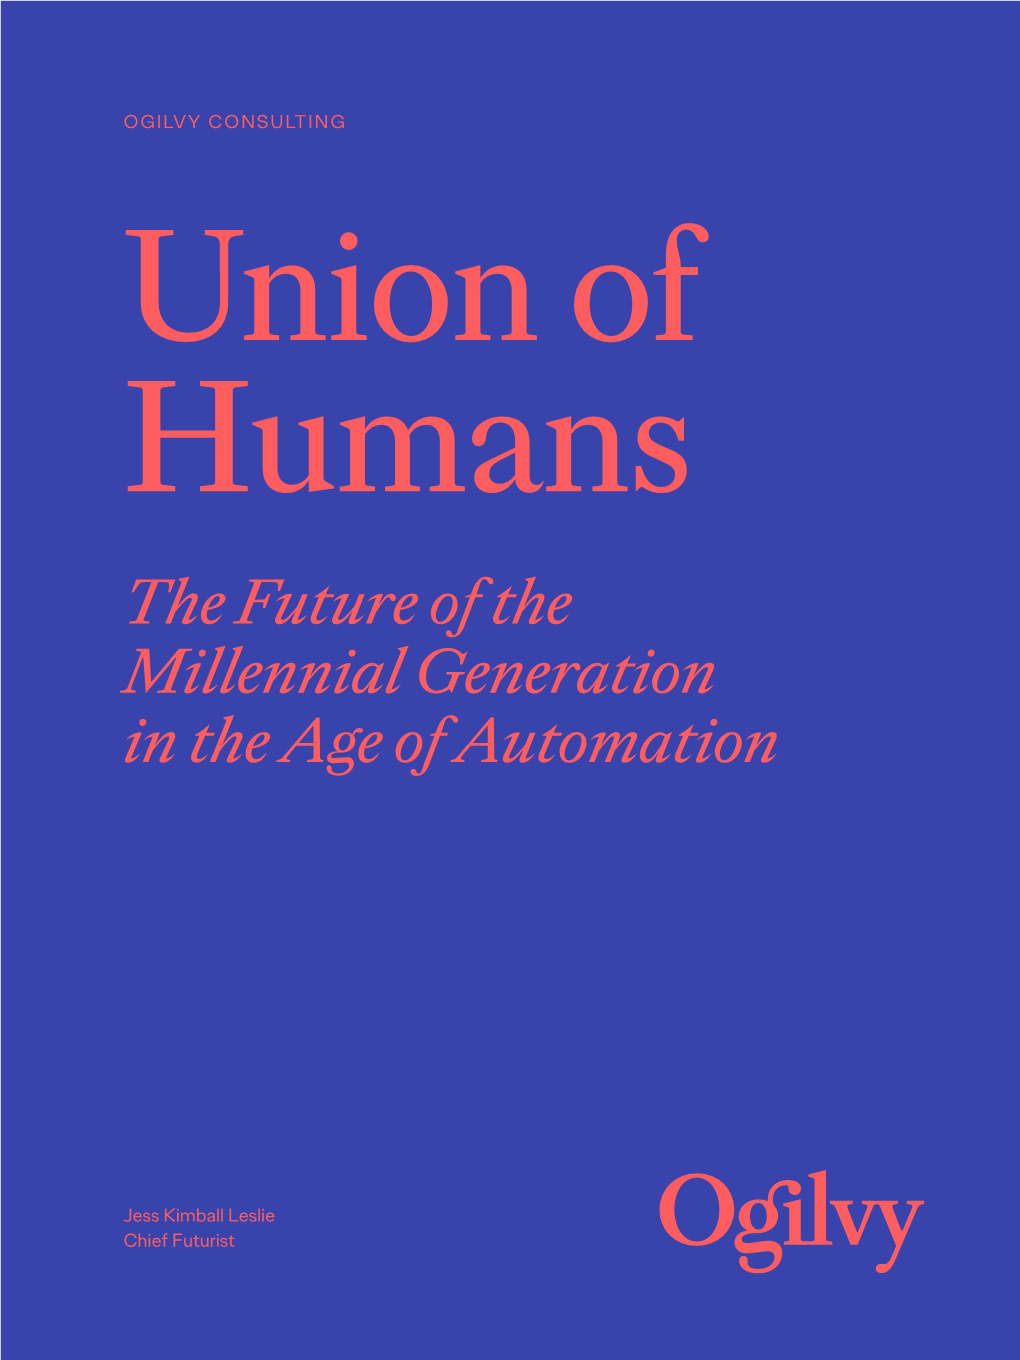 The Future of the Millennial Generation in the Age of Automation